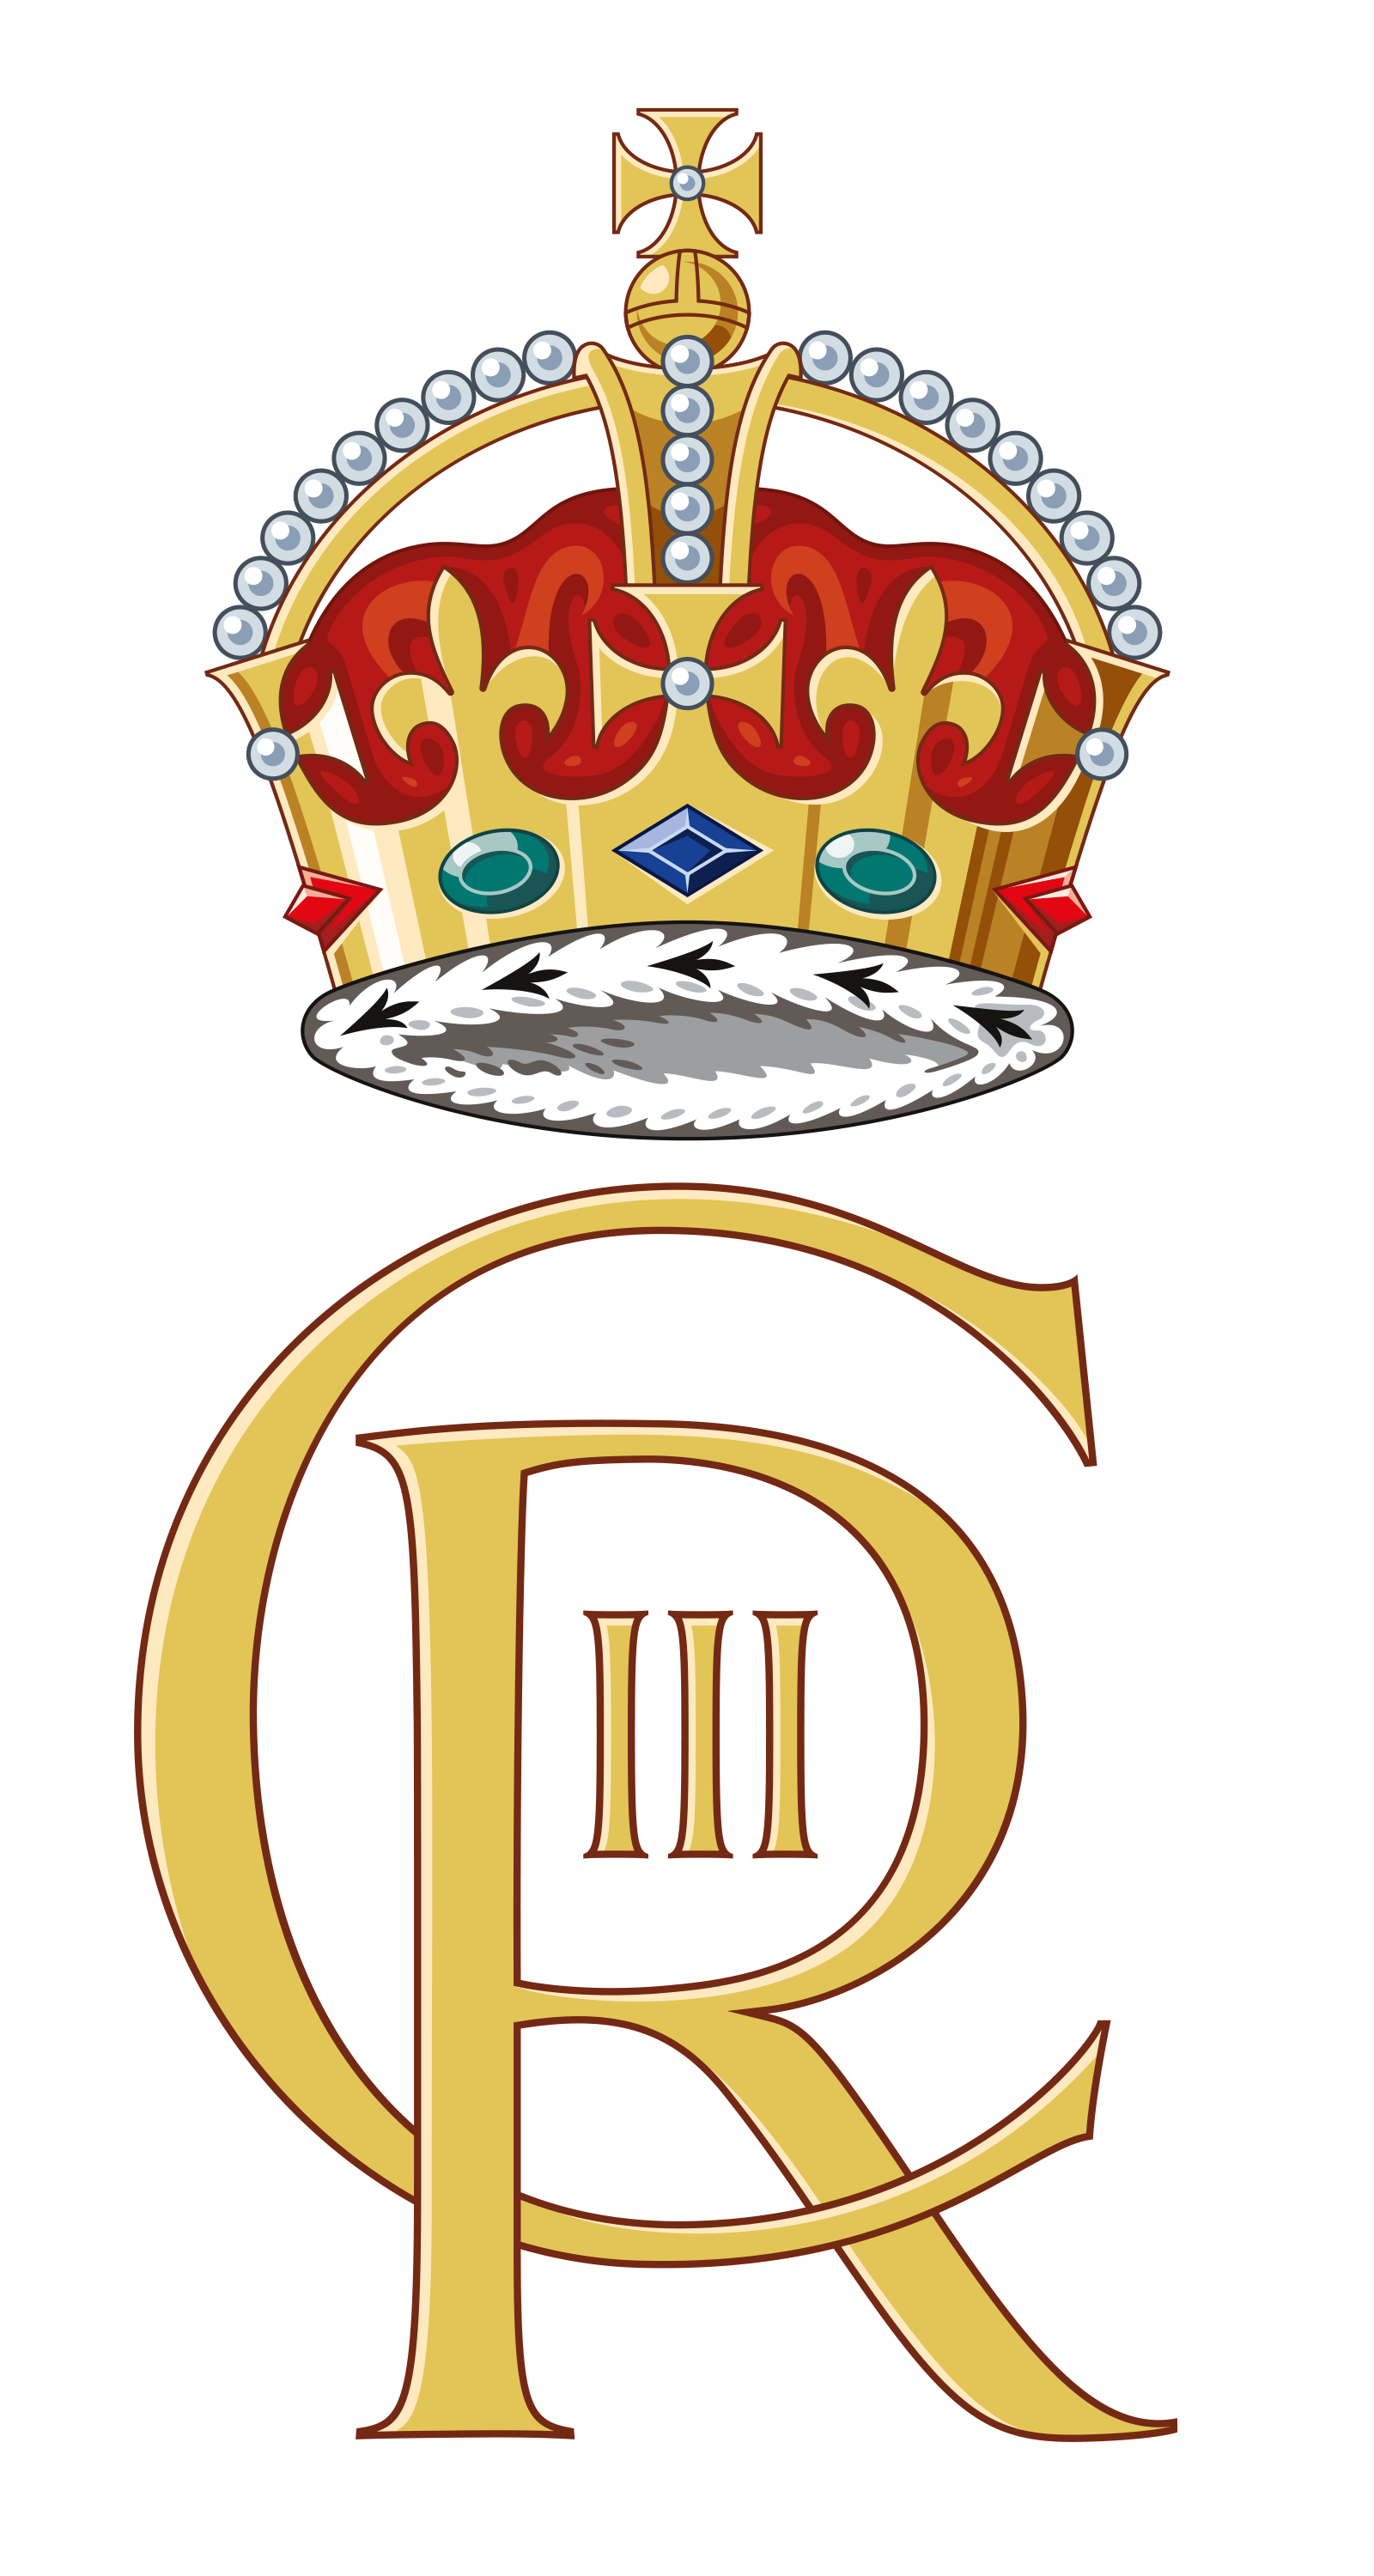 Image shows the new King Charles’ cypher featuring the letter ‘C’ intertwined with the letter ‘R around a roman numeral three. A royal crown sits above it.